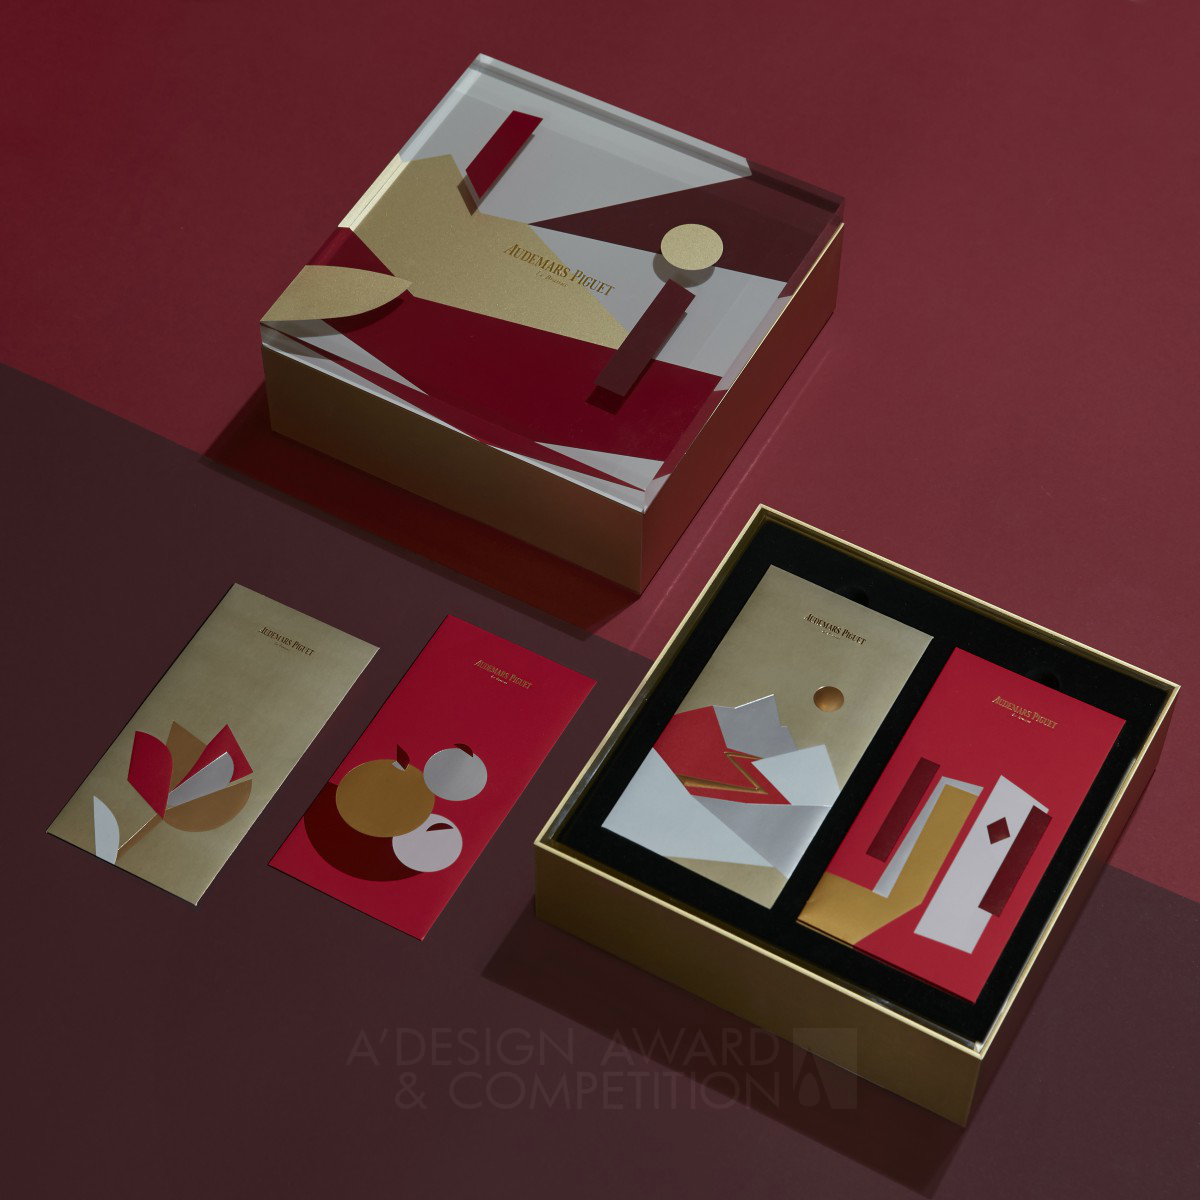 Audemars Piguet X Art X Chinese New Year Red pockets and gifting design by Ruth Chao